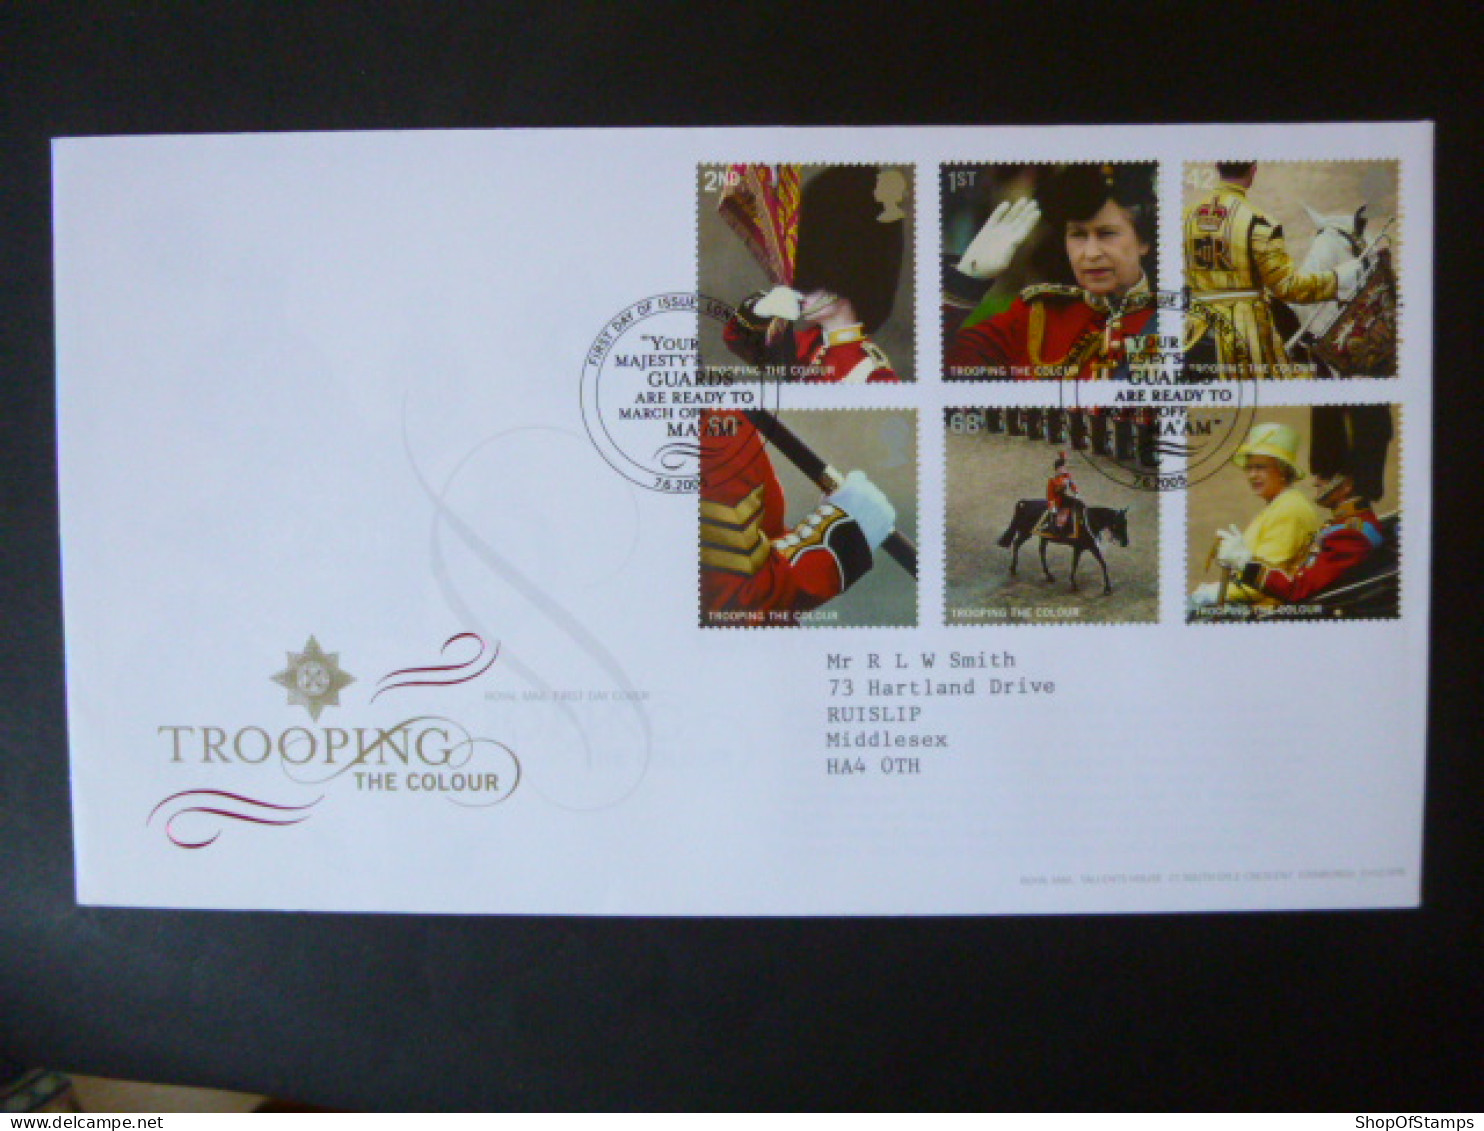 GREAT BRITAIN SG 2540-45 TROOPING THE COLOUR FDC LONDON - Unclassified